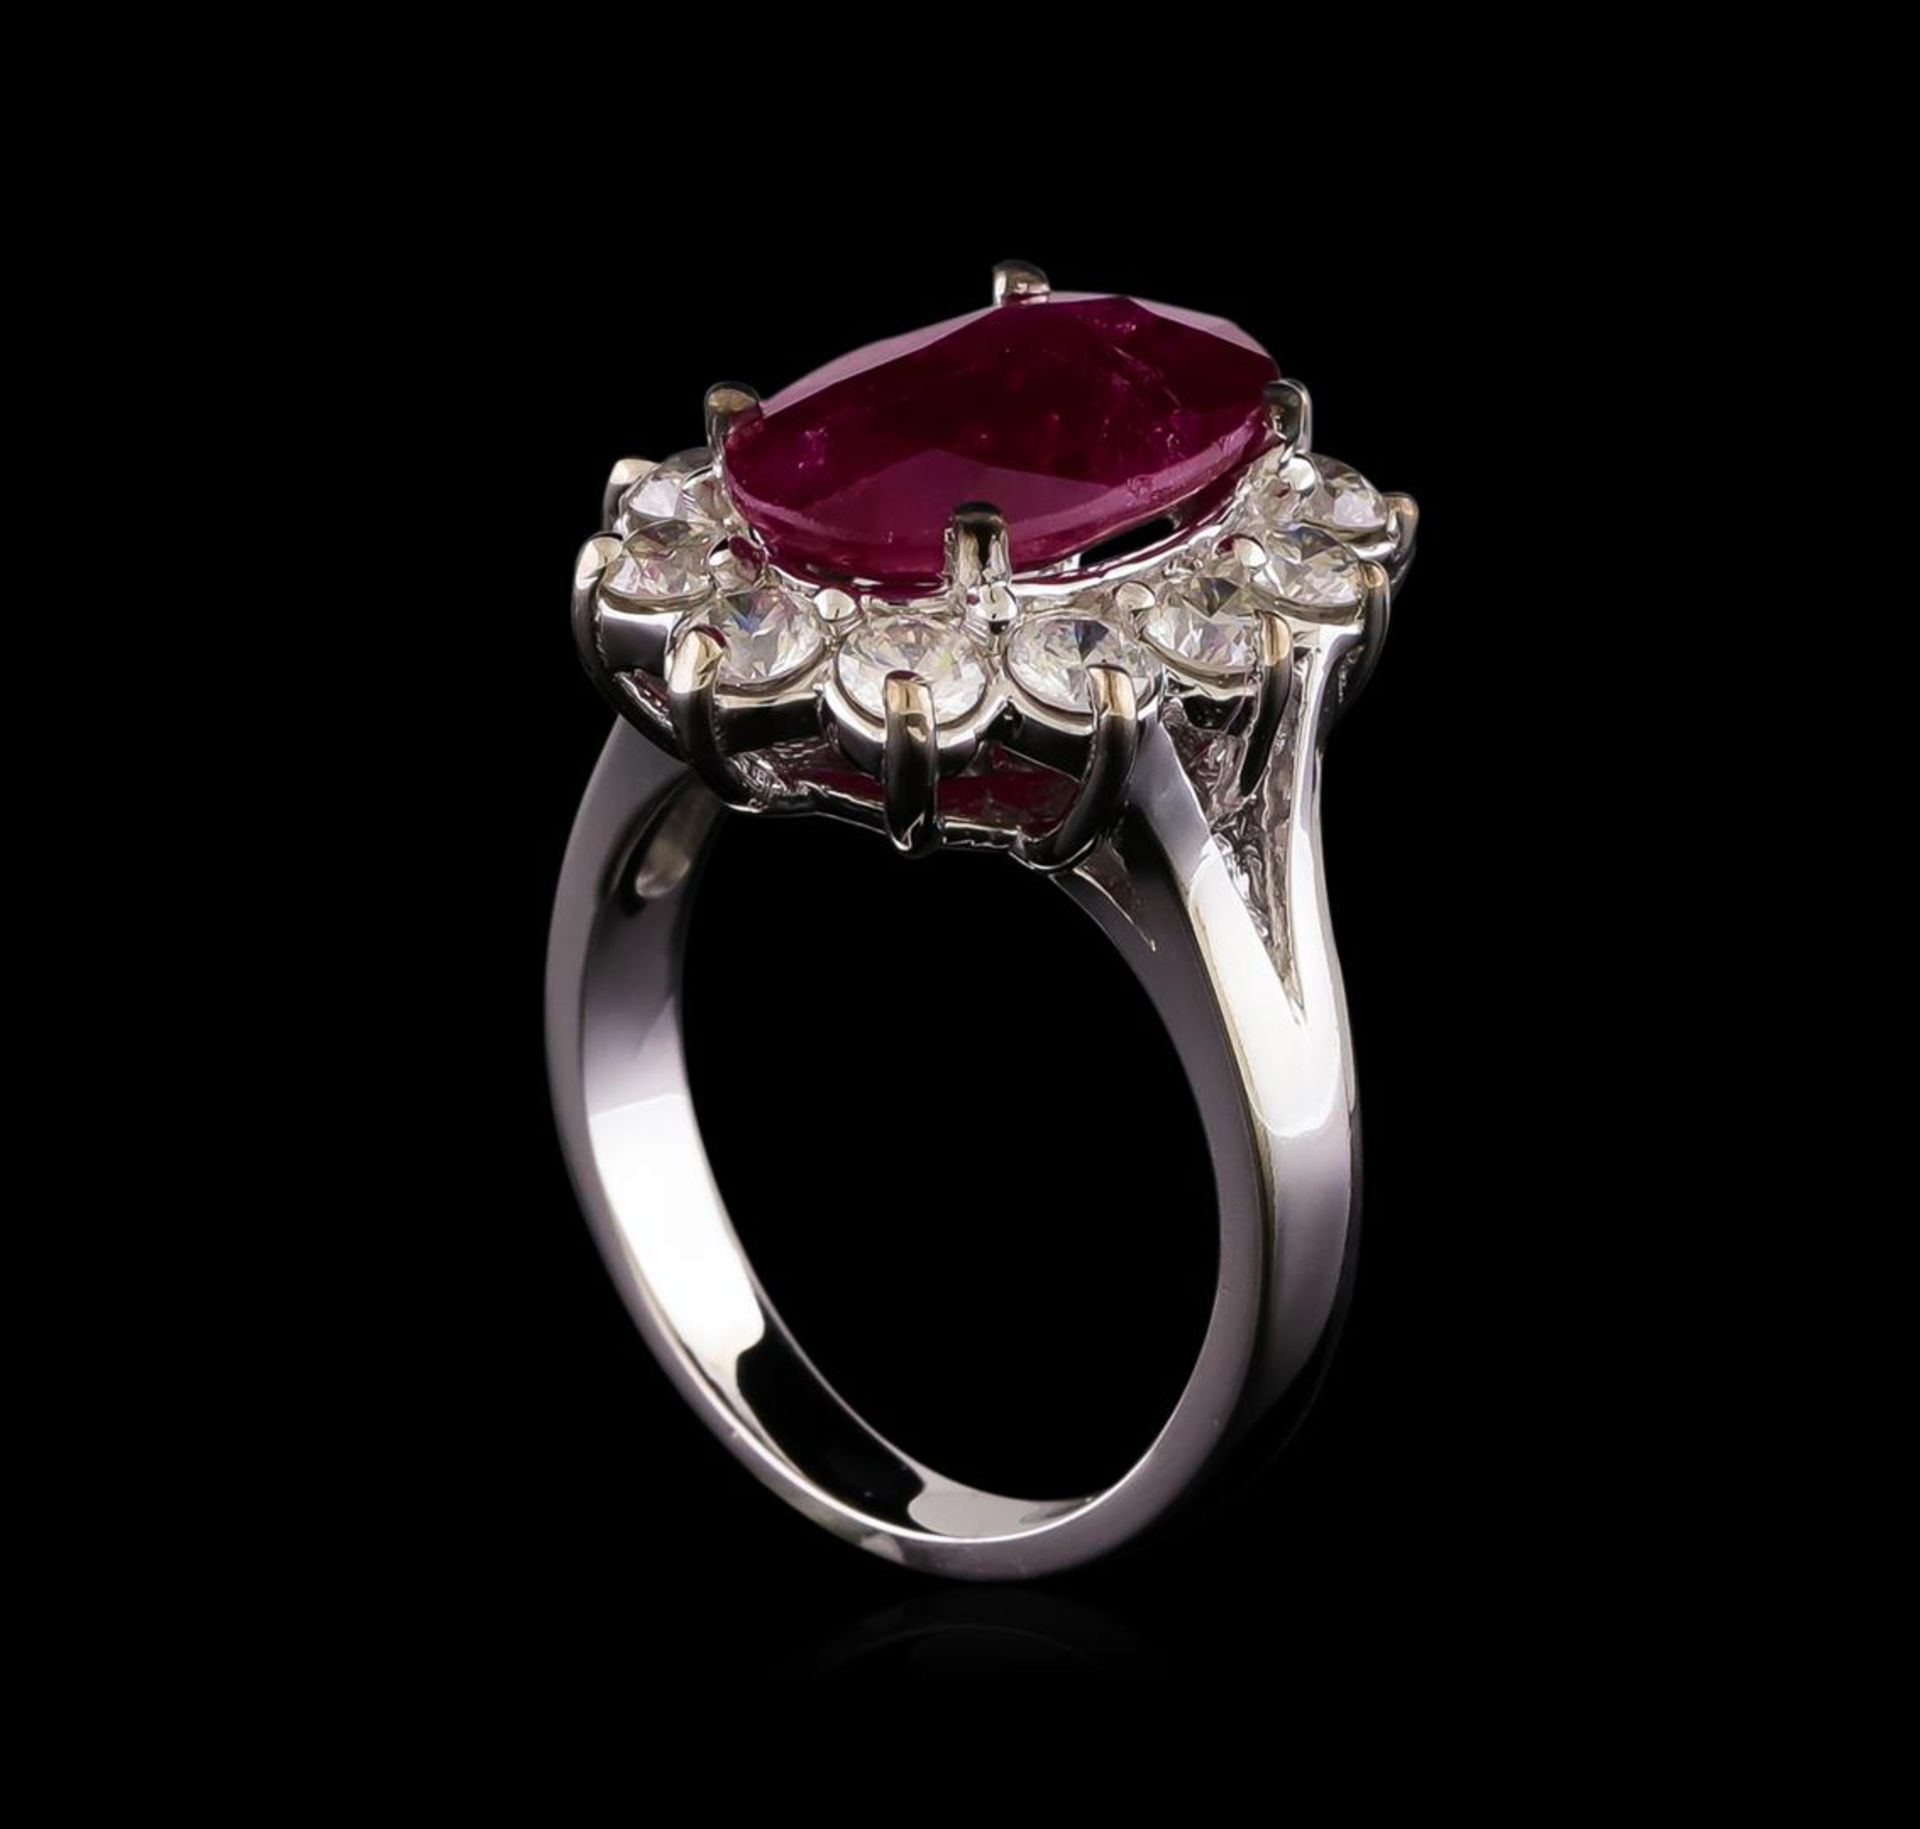 GIA Cert 4.09 ctw Ruby and Diamond Ring - 14KT White Gold - Image 4 of 6